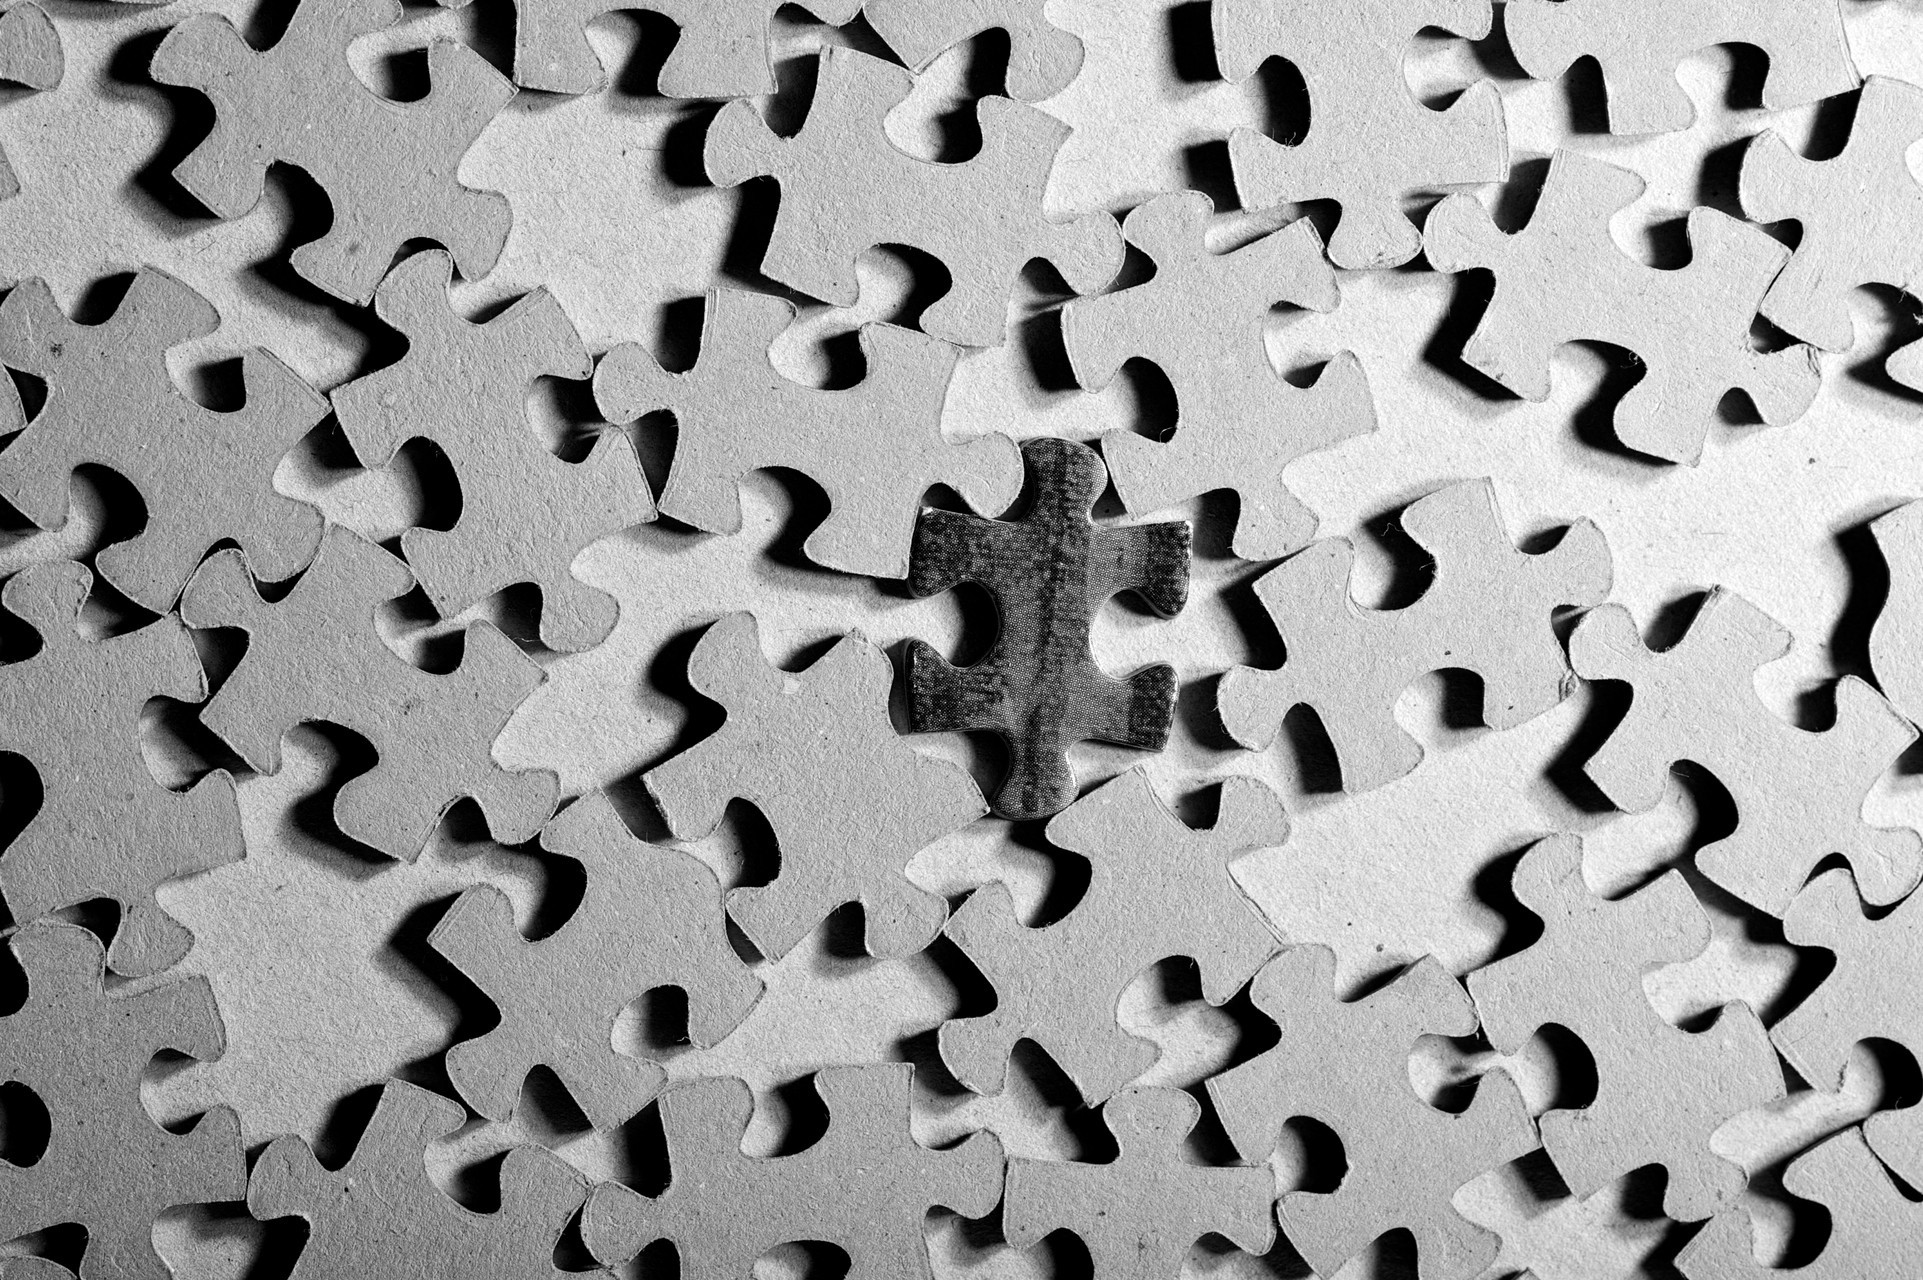 New Lock Screen Wallpapers texture, miscellanea, miscellaneous, form, bw, chb, puzzle, jigsaw